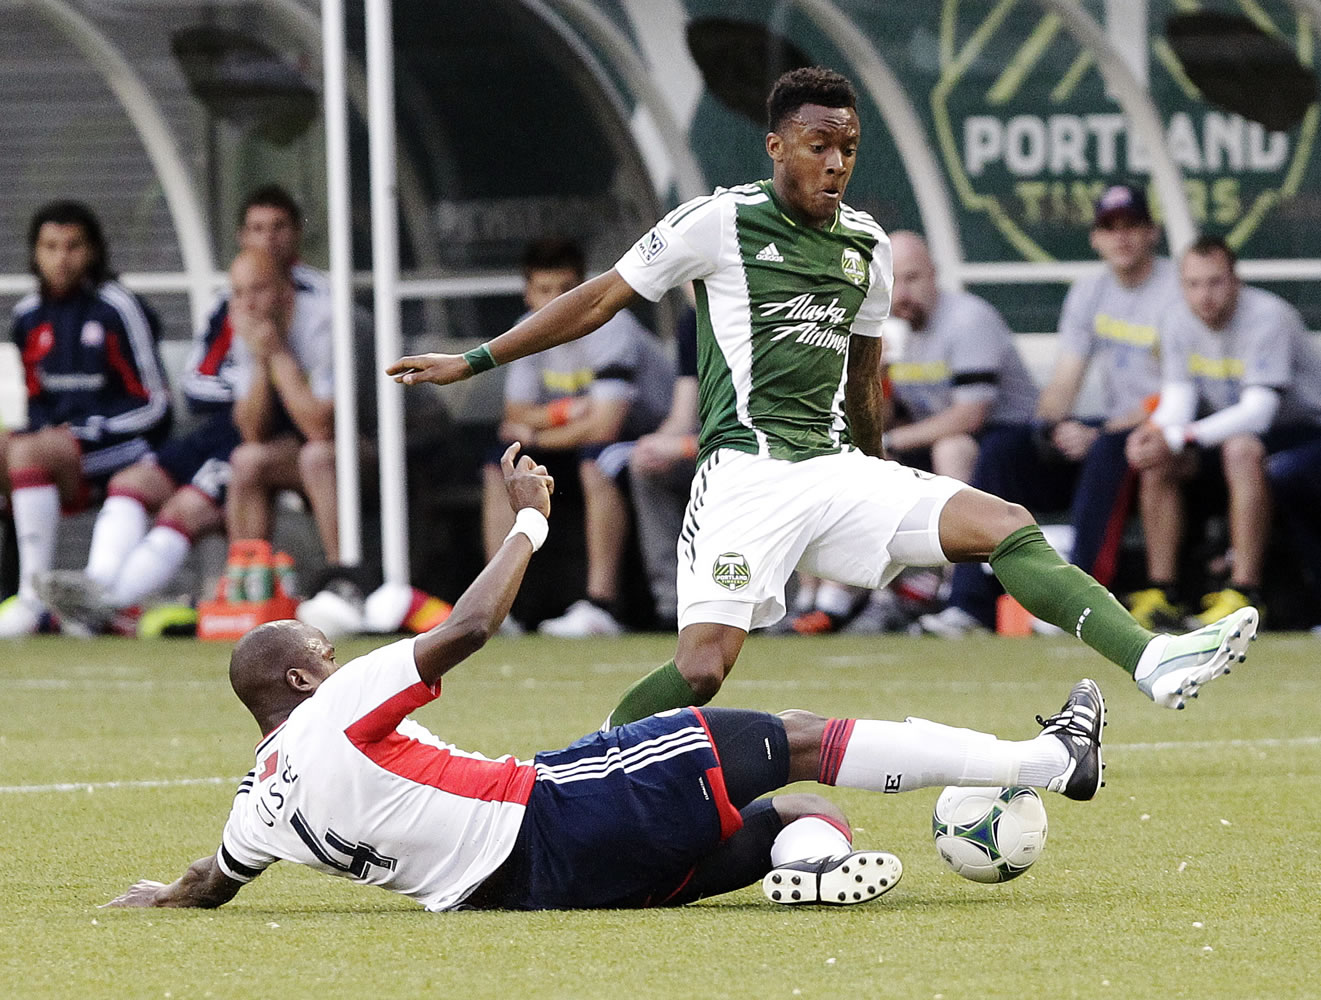 New England Revolution midfielder Kalifa Cisse, left, slides in to steal the ball from Portland Timbers forward Rodney Wallace during the first half Thursday.